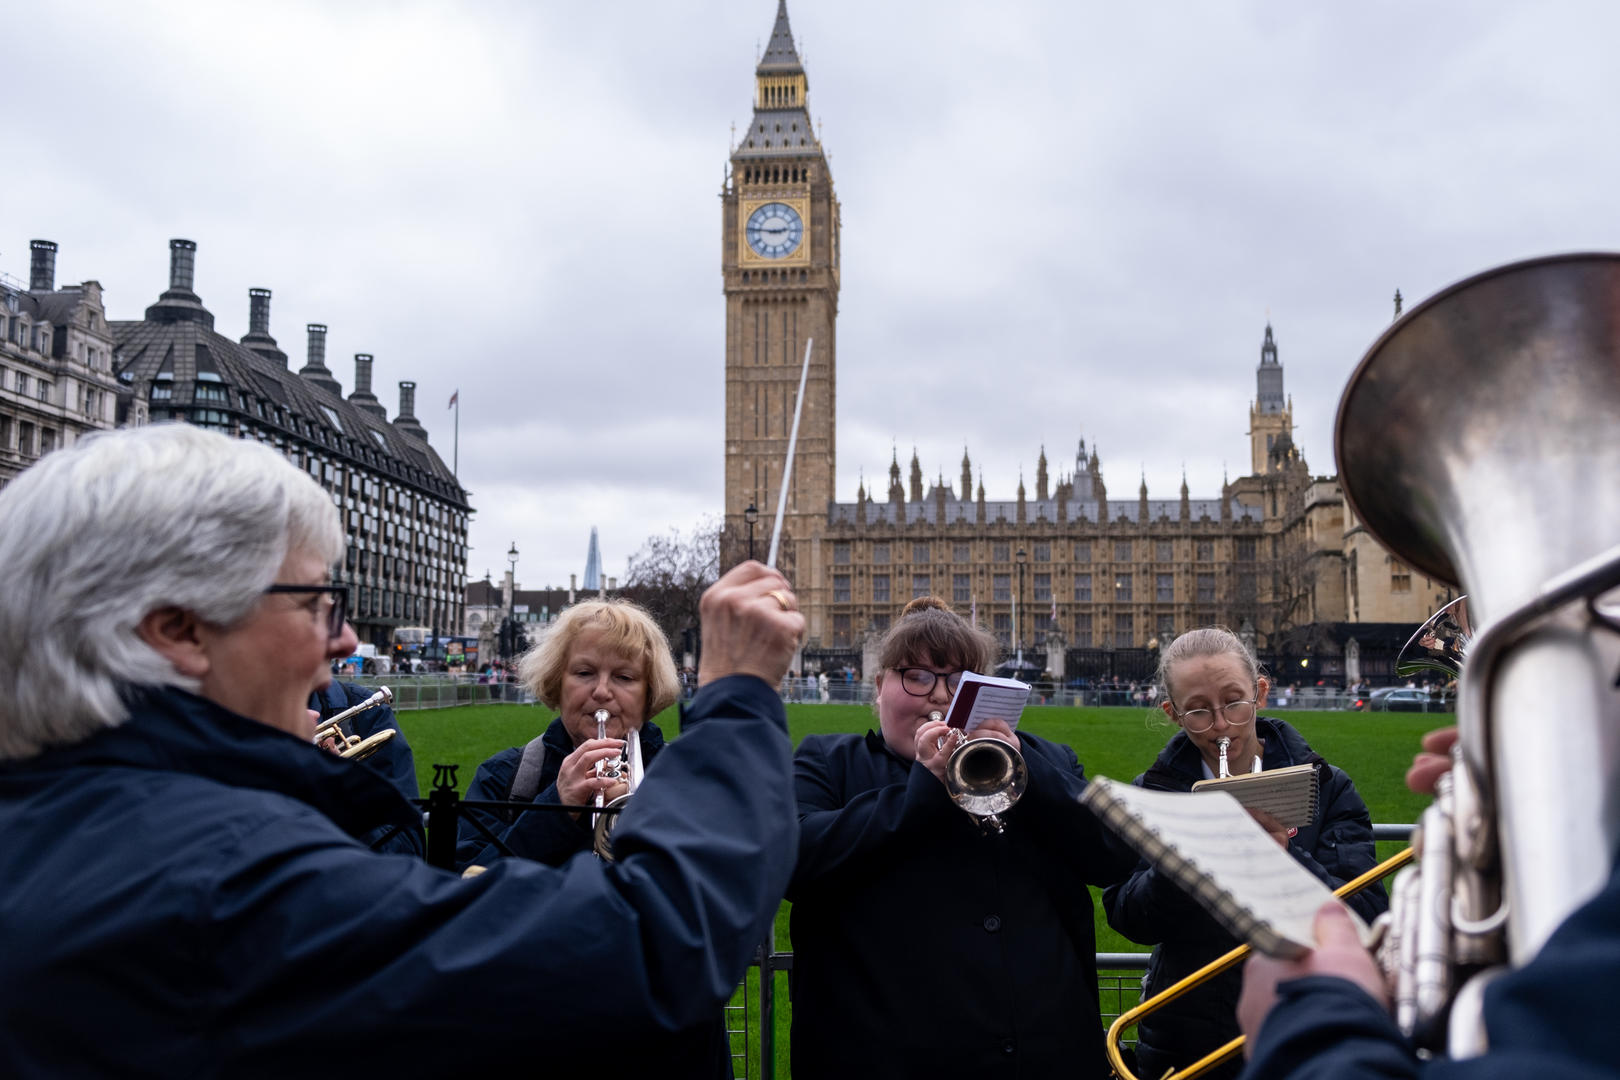 A photo of a brass band playing at the vigil